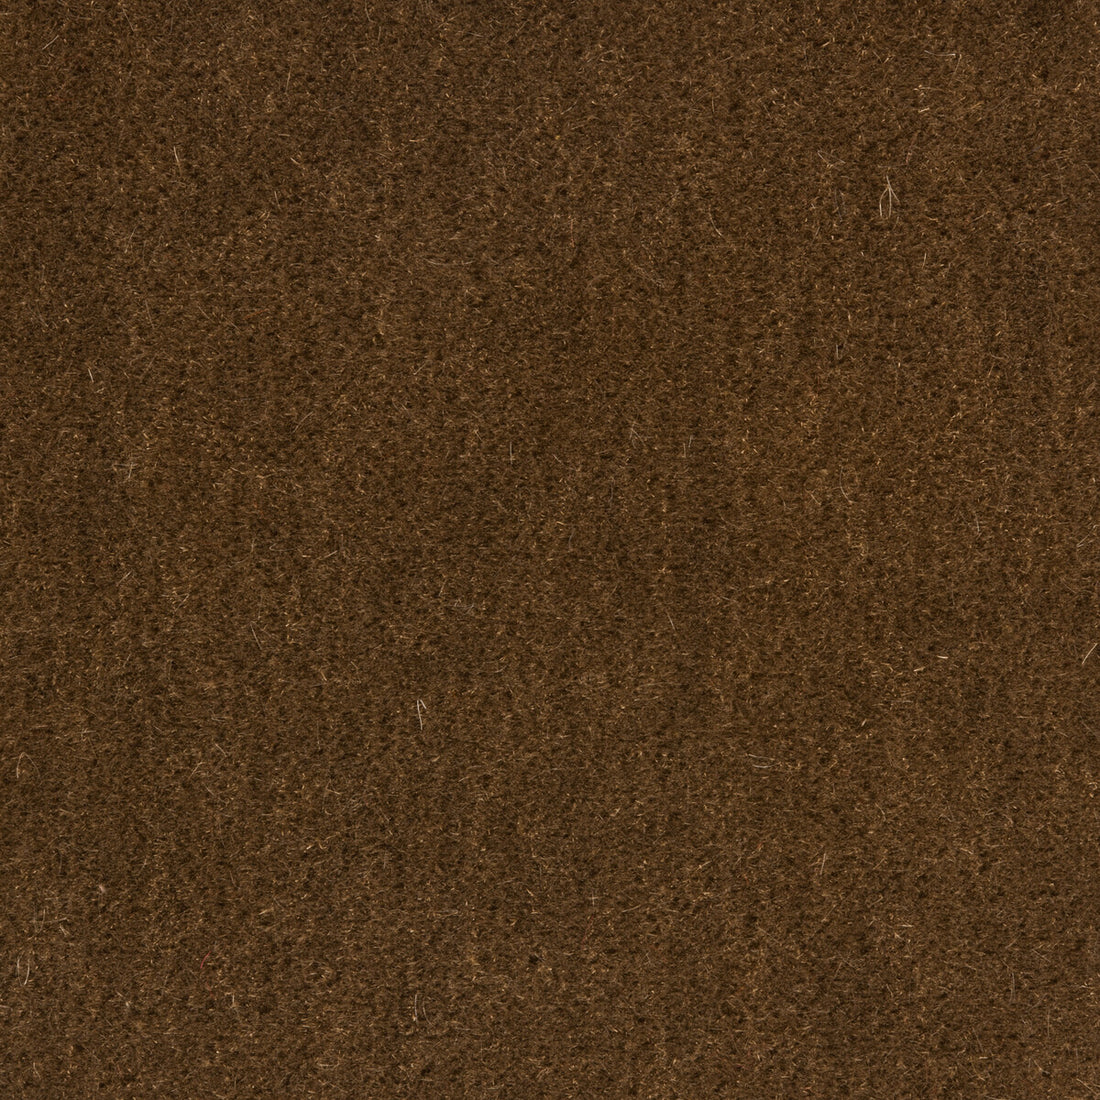 Windsor Mohair fabric in oak color - pattern 34258.616.0 - by Kravet Couture